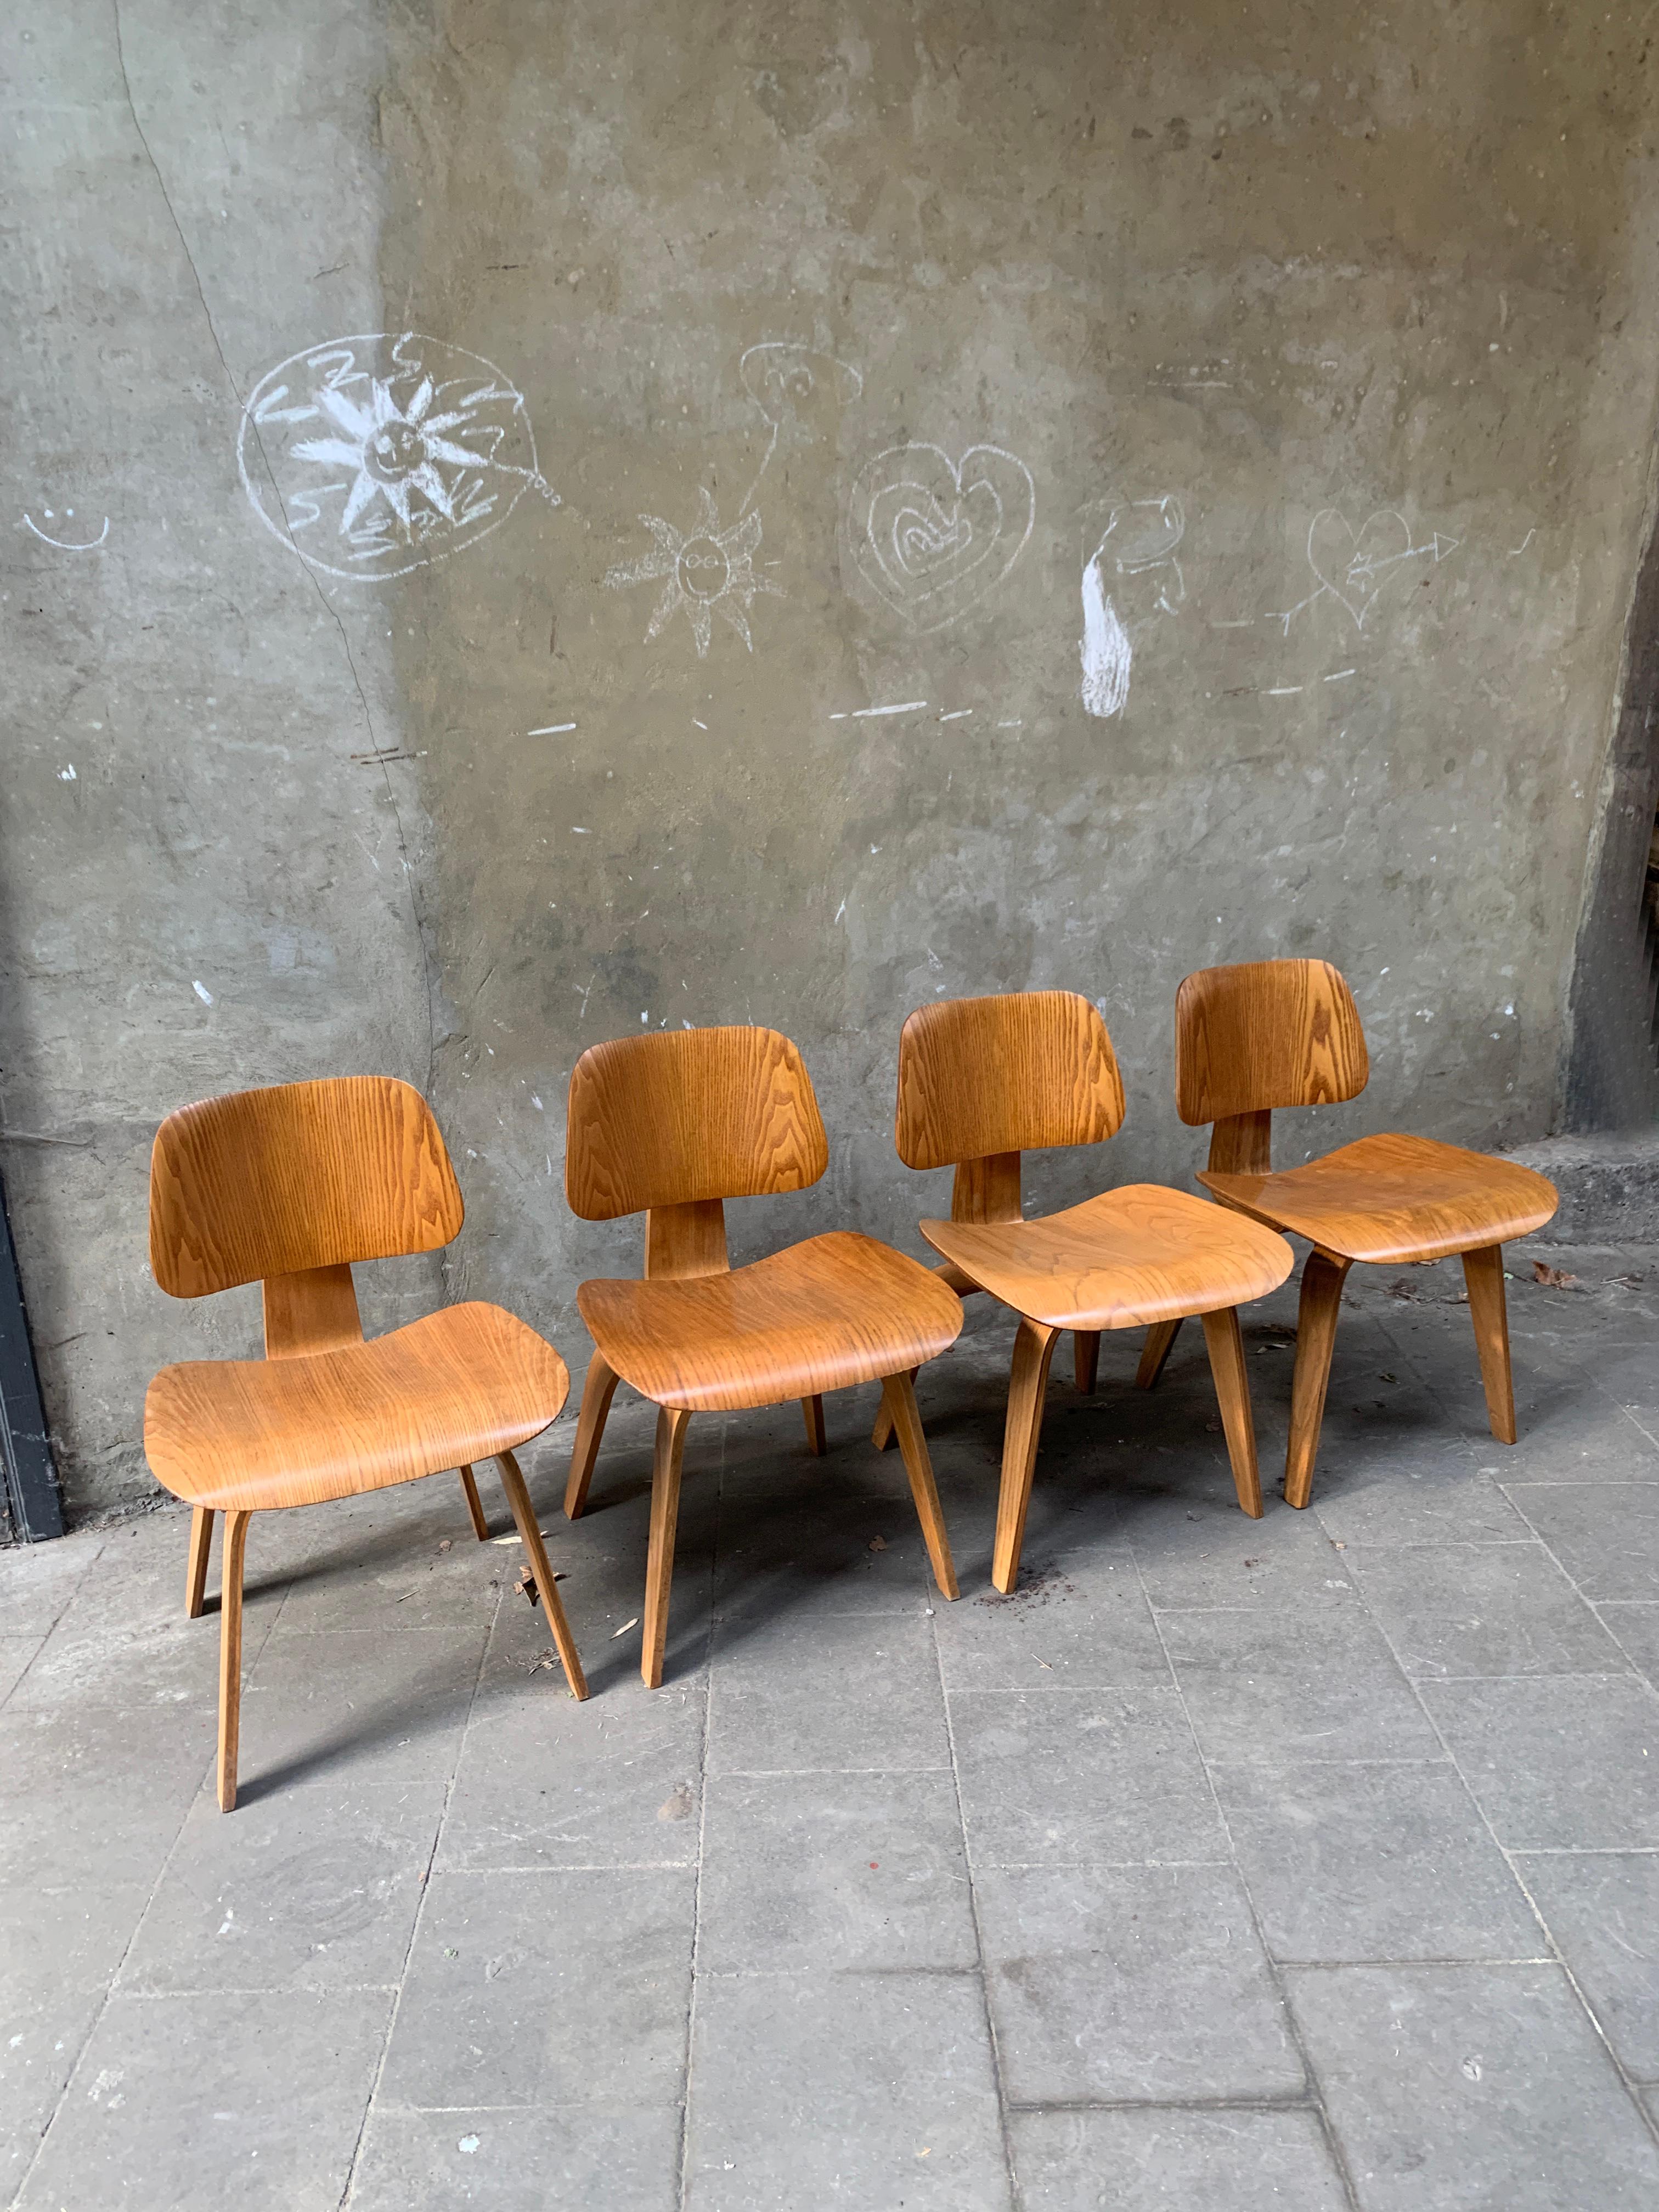 DCW (dining chair wood) chairs In ash veneer. 
First generation chairs produced by Evans Products Company and distributed by Herman Miller between 1946 and 1950. 
All 4 retain the original label.